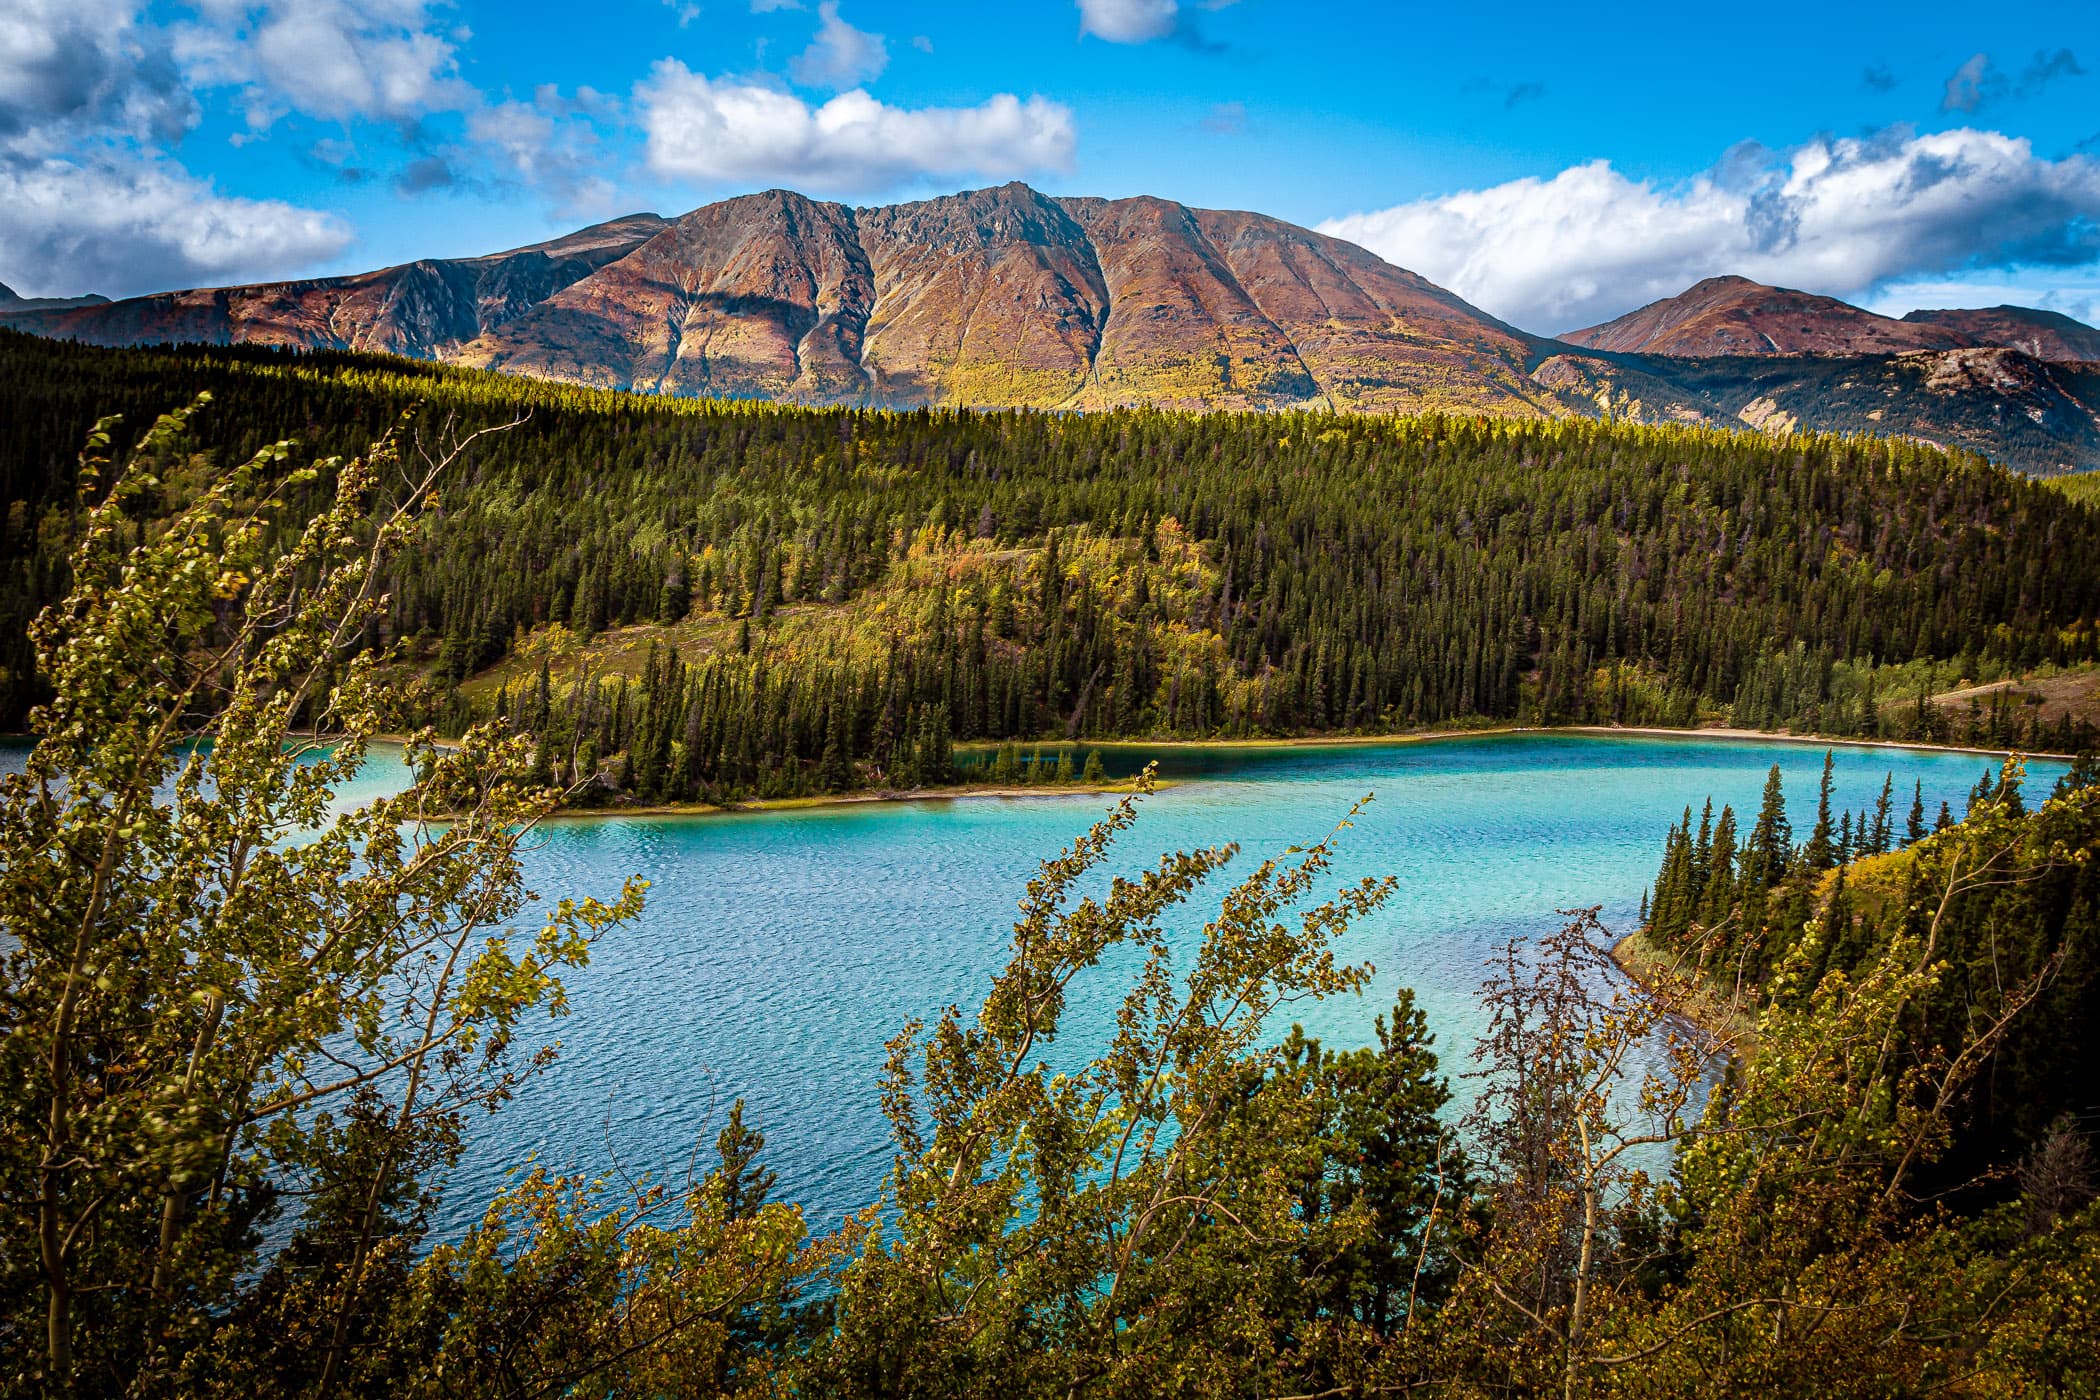 The deep blue-green waters of Emerald Lake, nestled in the mountains just north of Carcross, Yukon Territory, Canada.